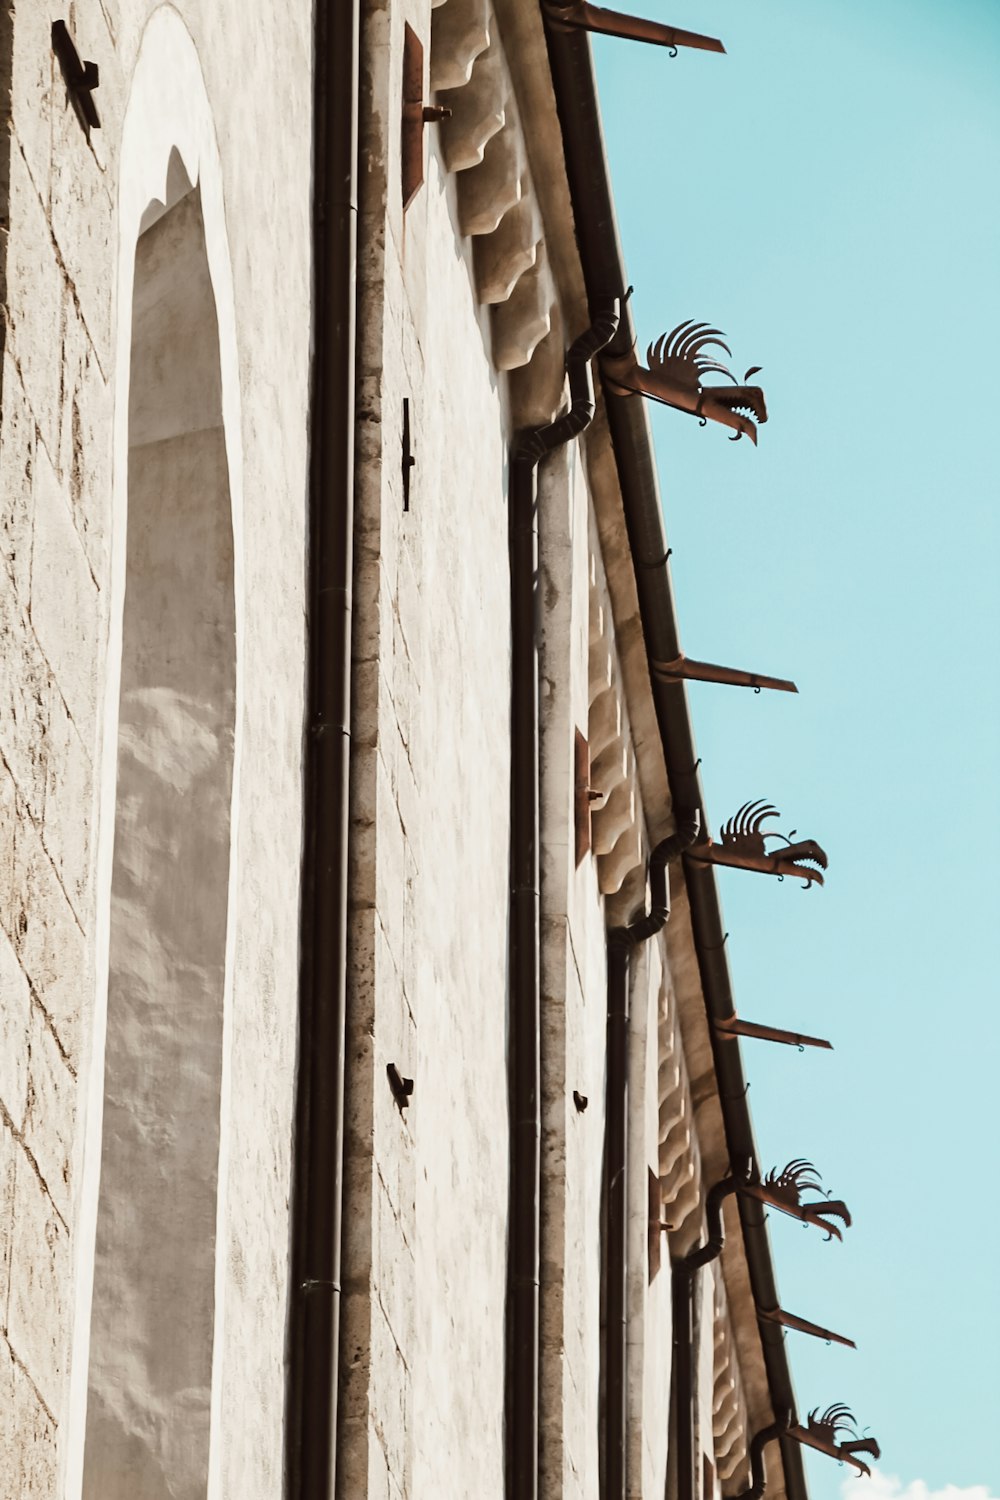 birds flying over brown concrete building during daytime